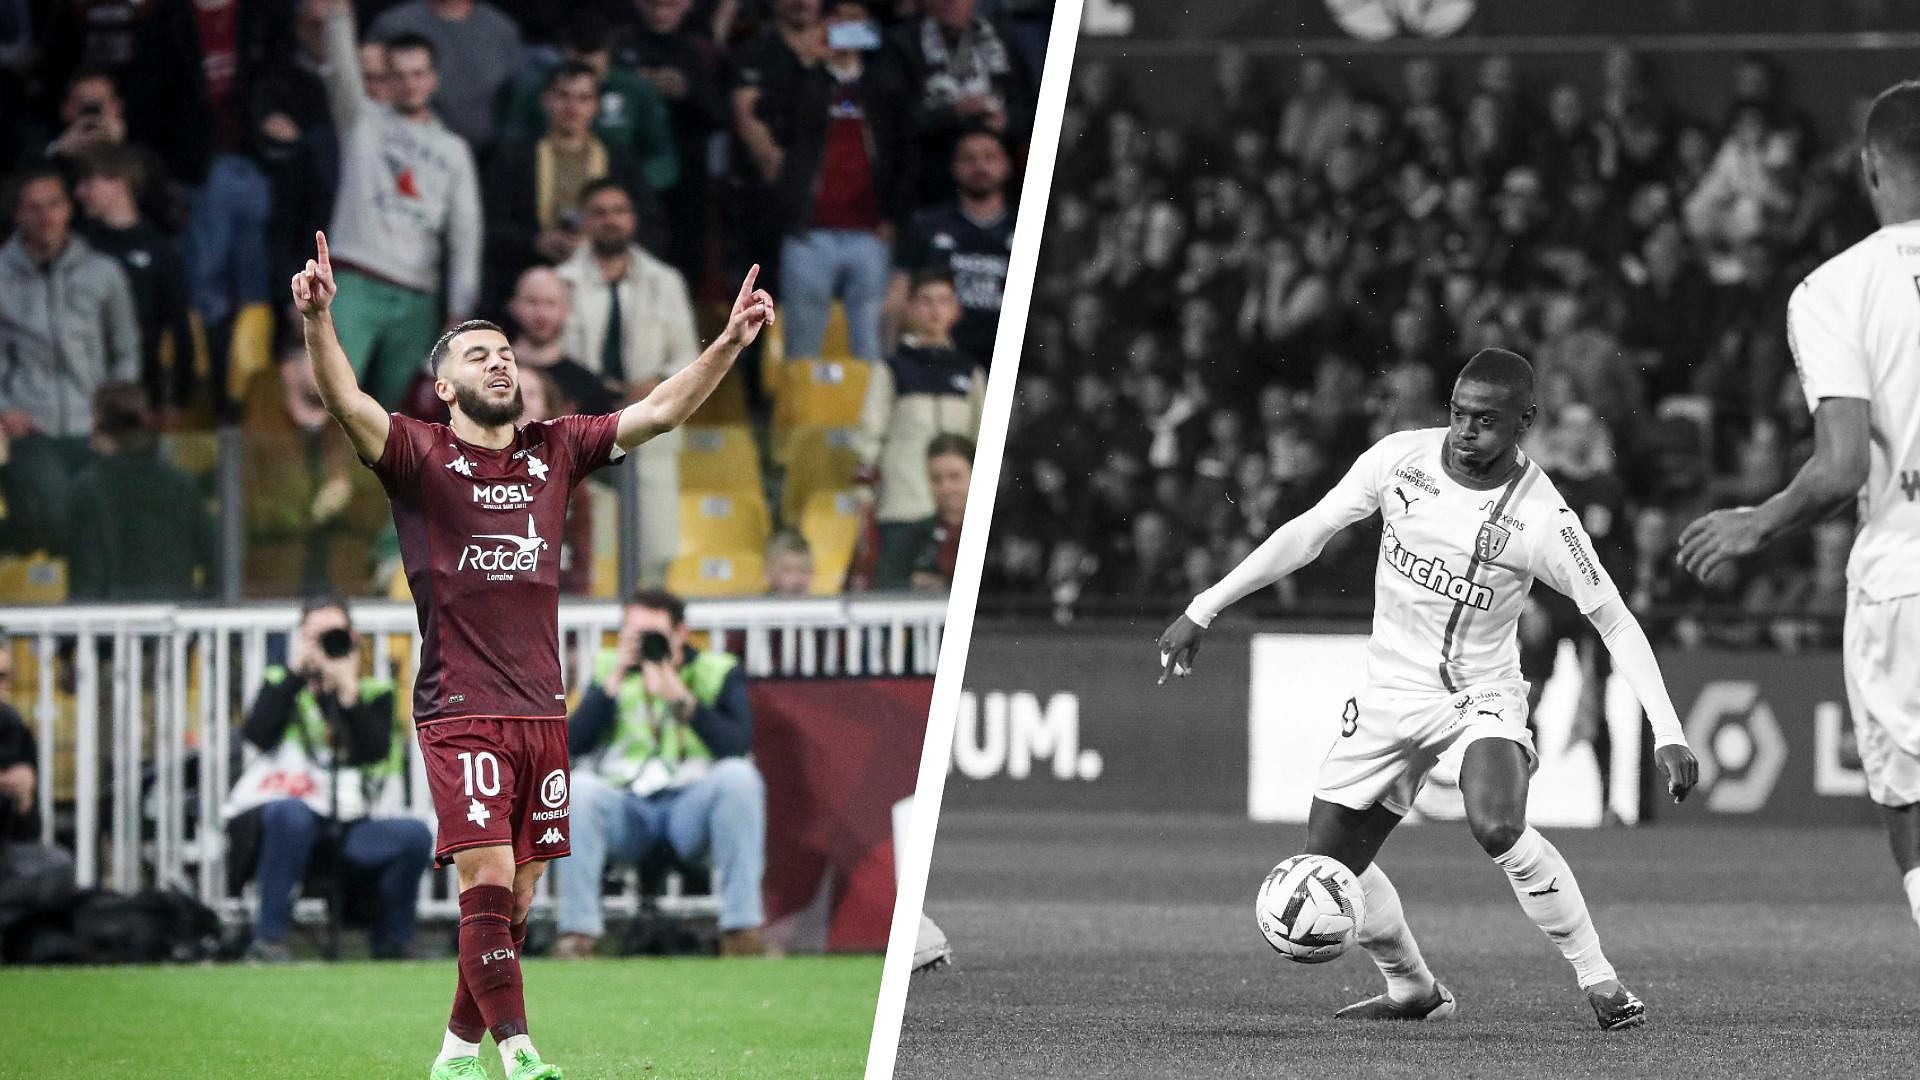 Metz-Lens: the savior Mikautadze, Lensoise inefficiency... The tops and the flops